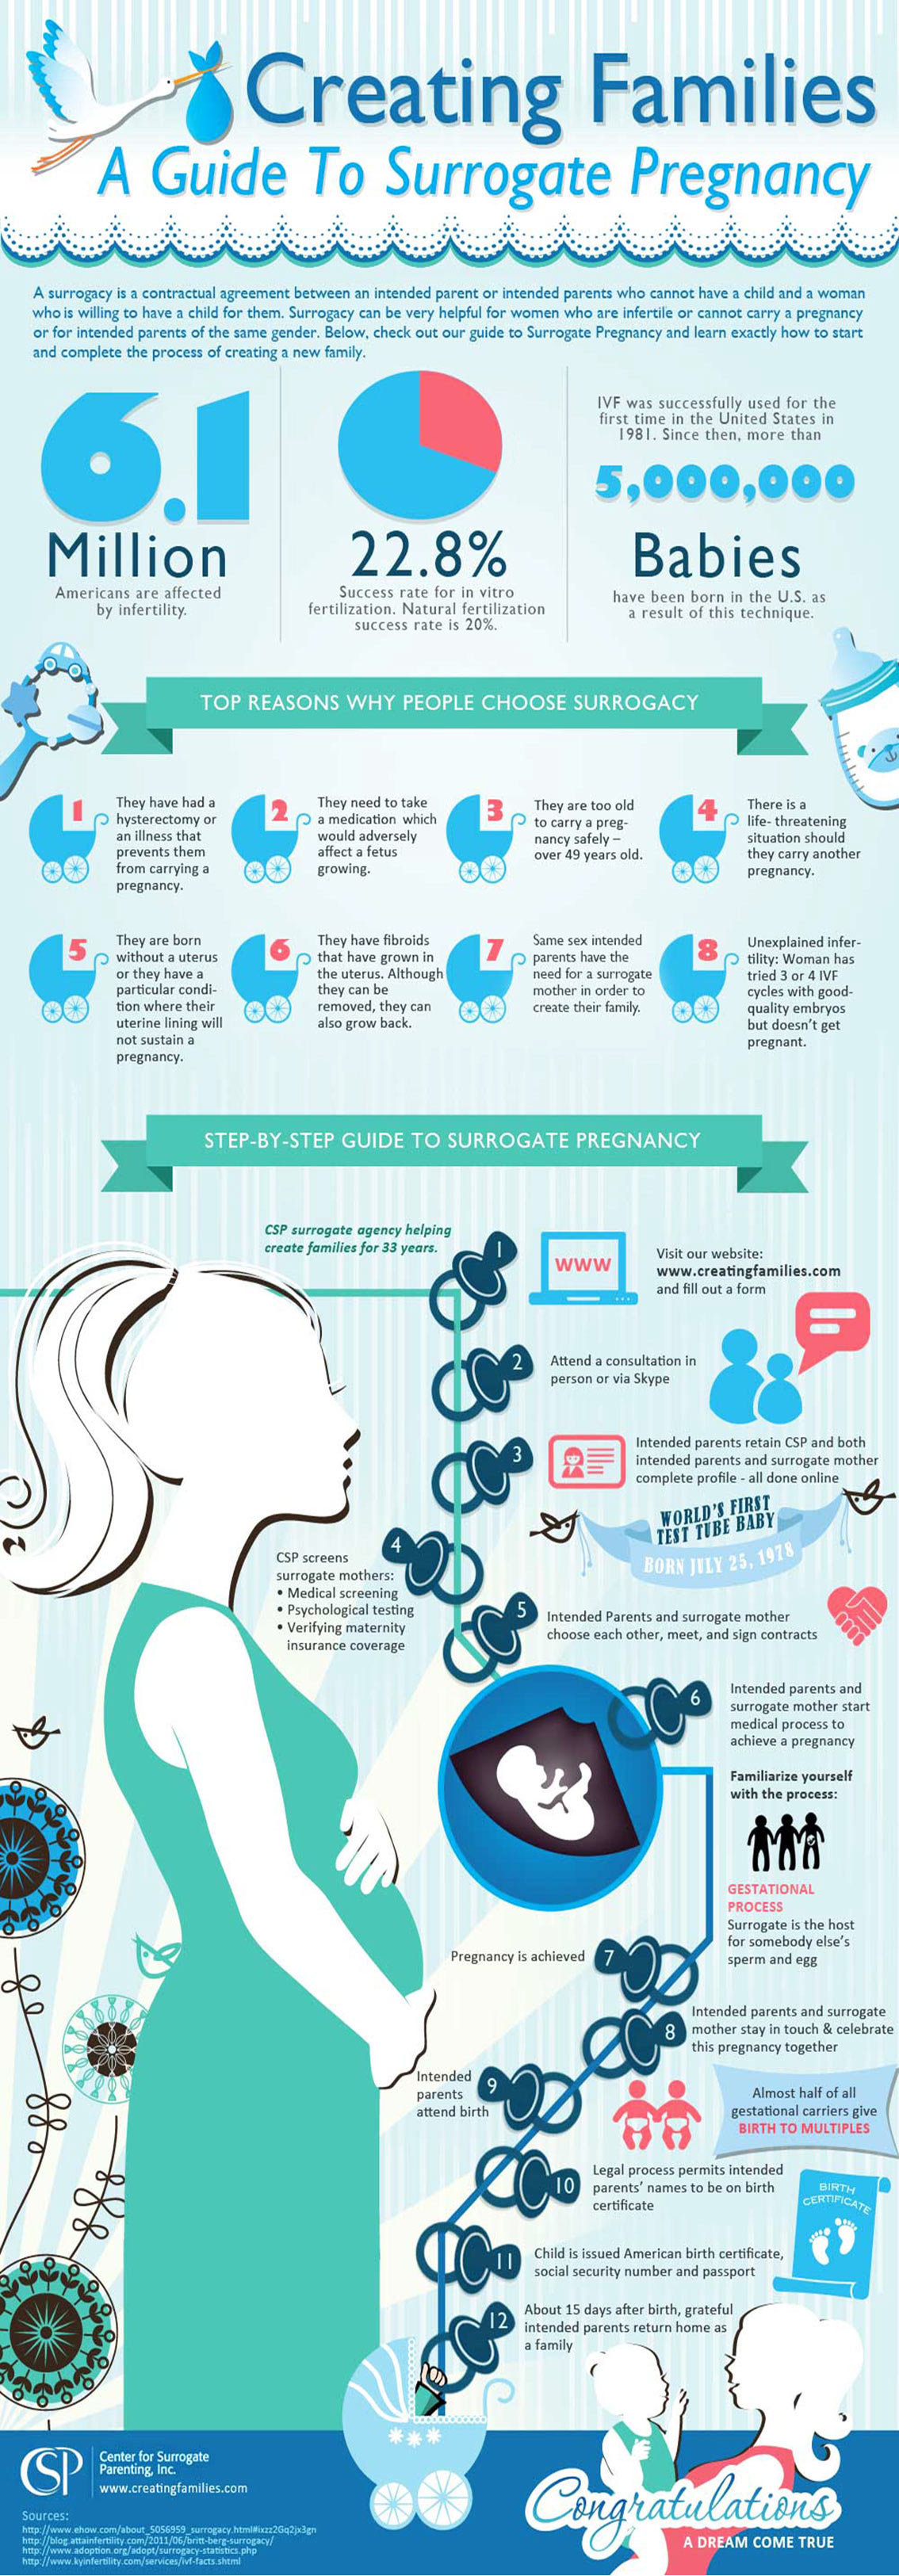 Step by Step Process of Surrogacy Pregnancy Infographic